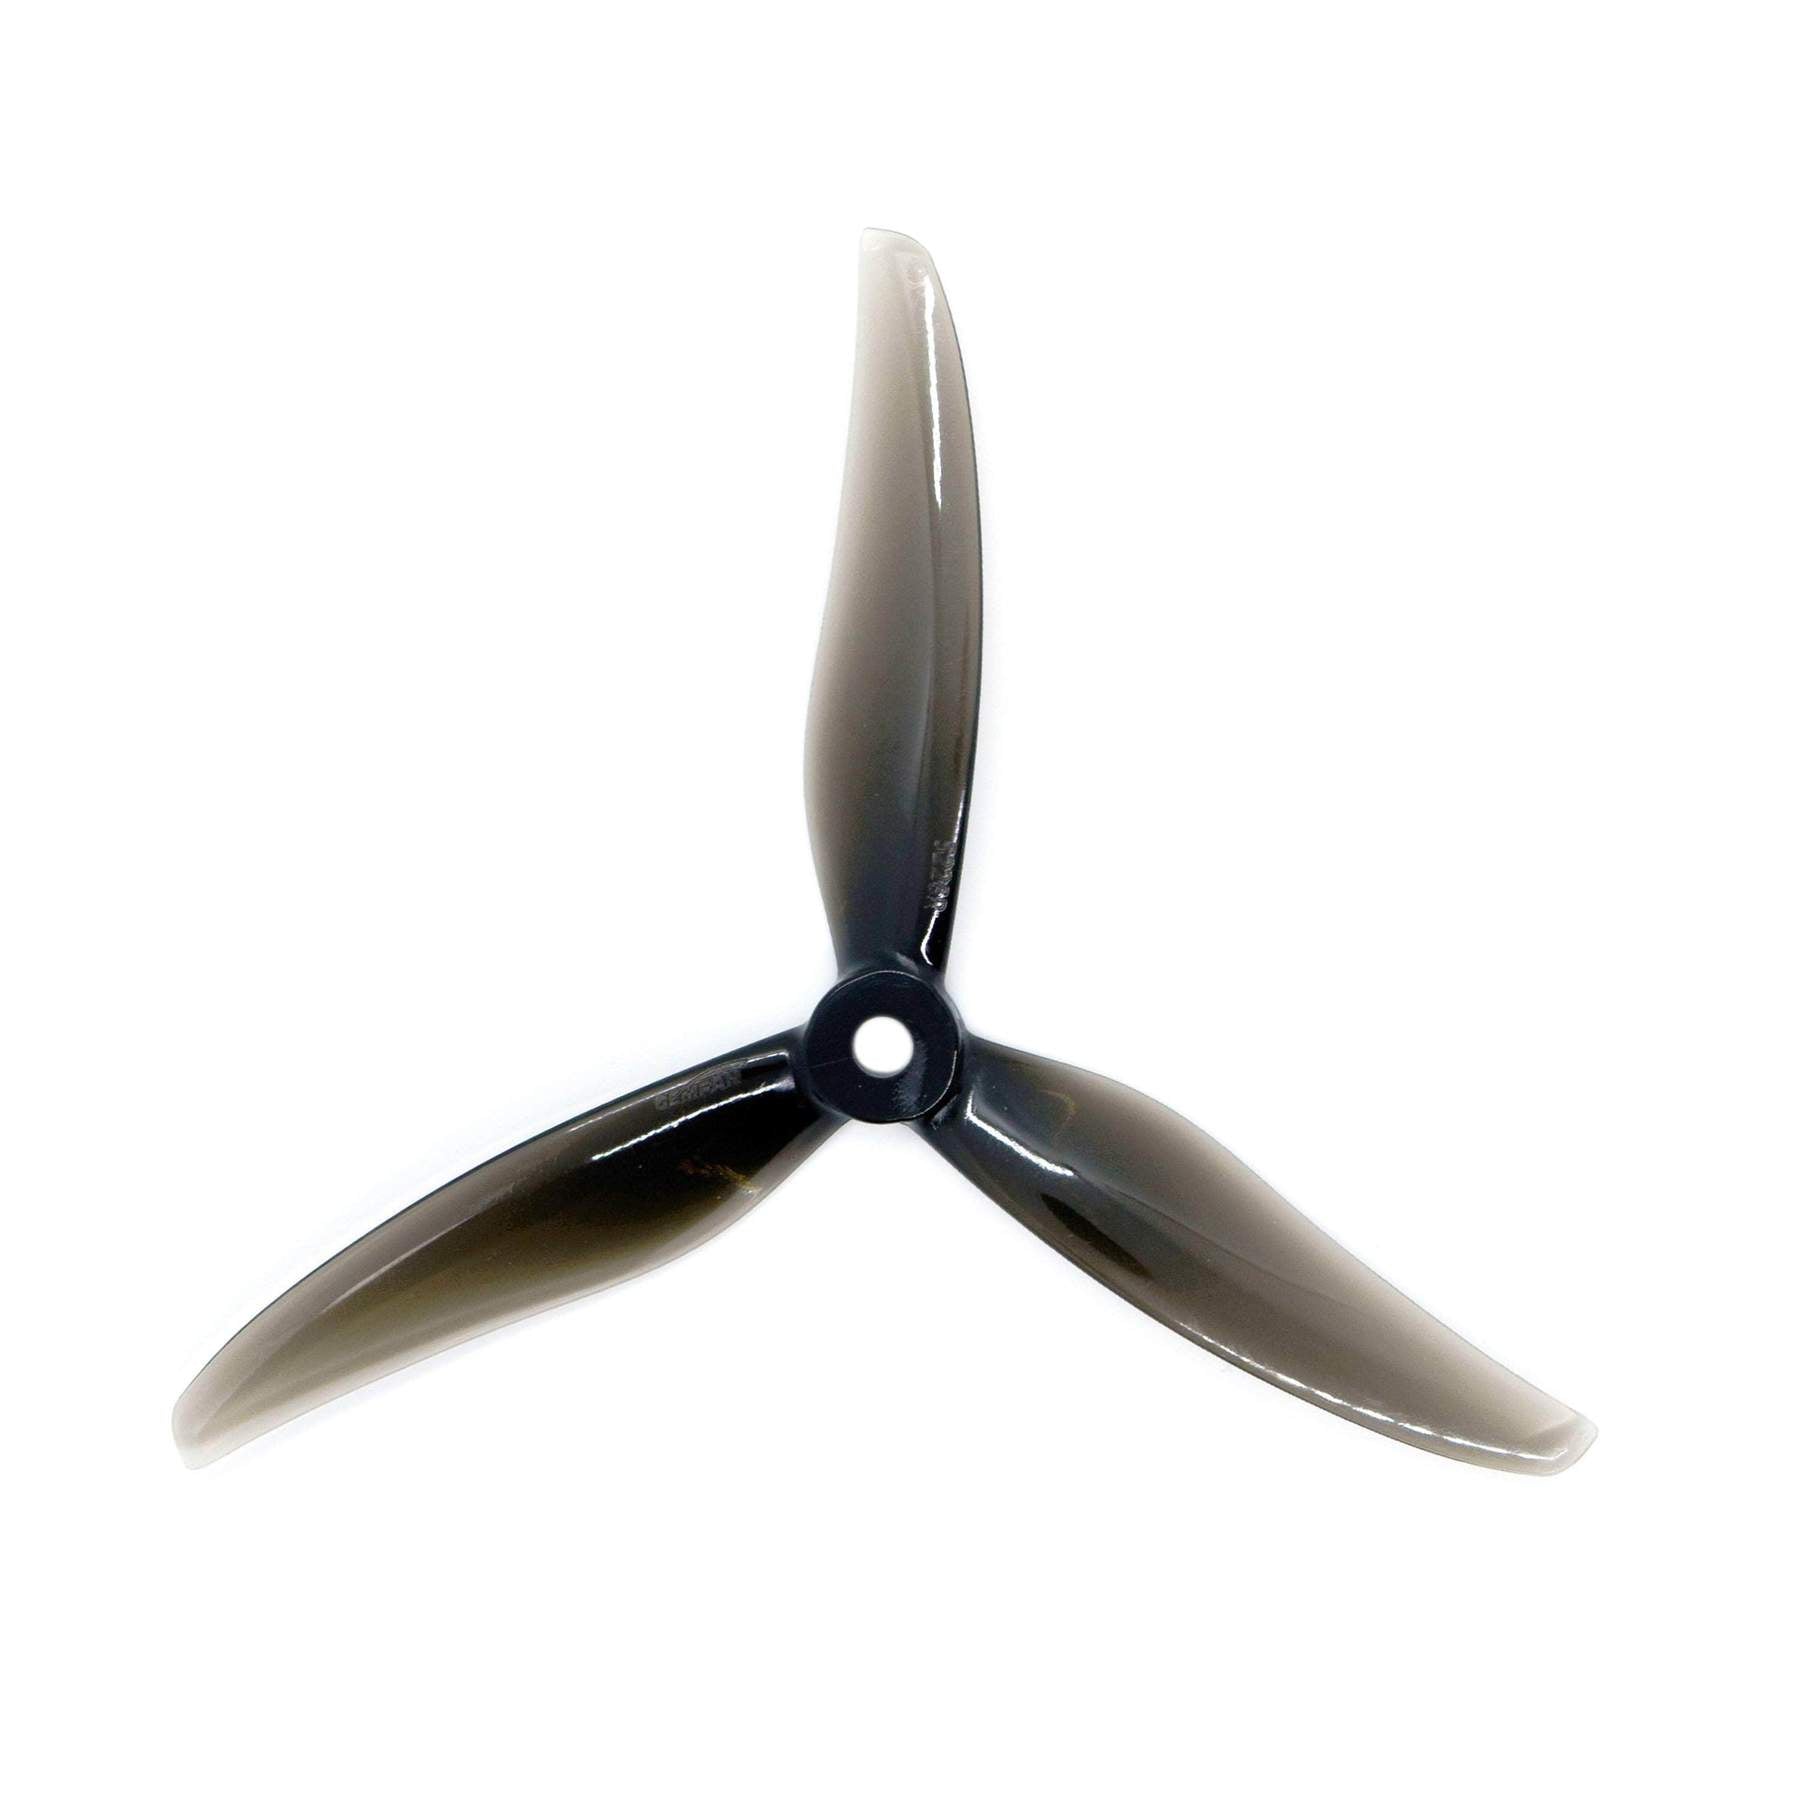 Gemfan Freestyle 5226 5.2" Durable Tri-Blade Propellers (2CW + 2CCW)